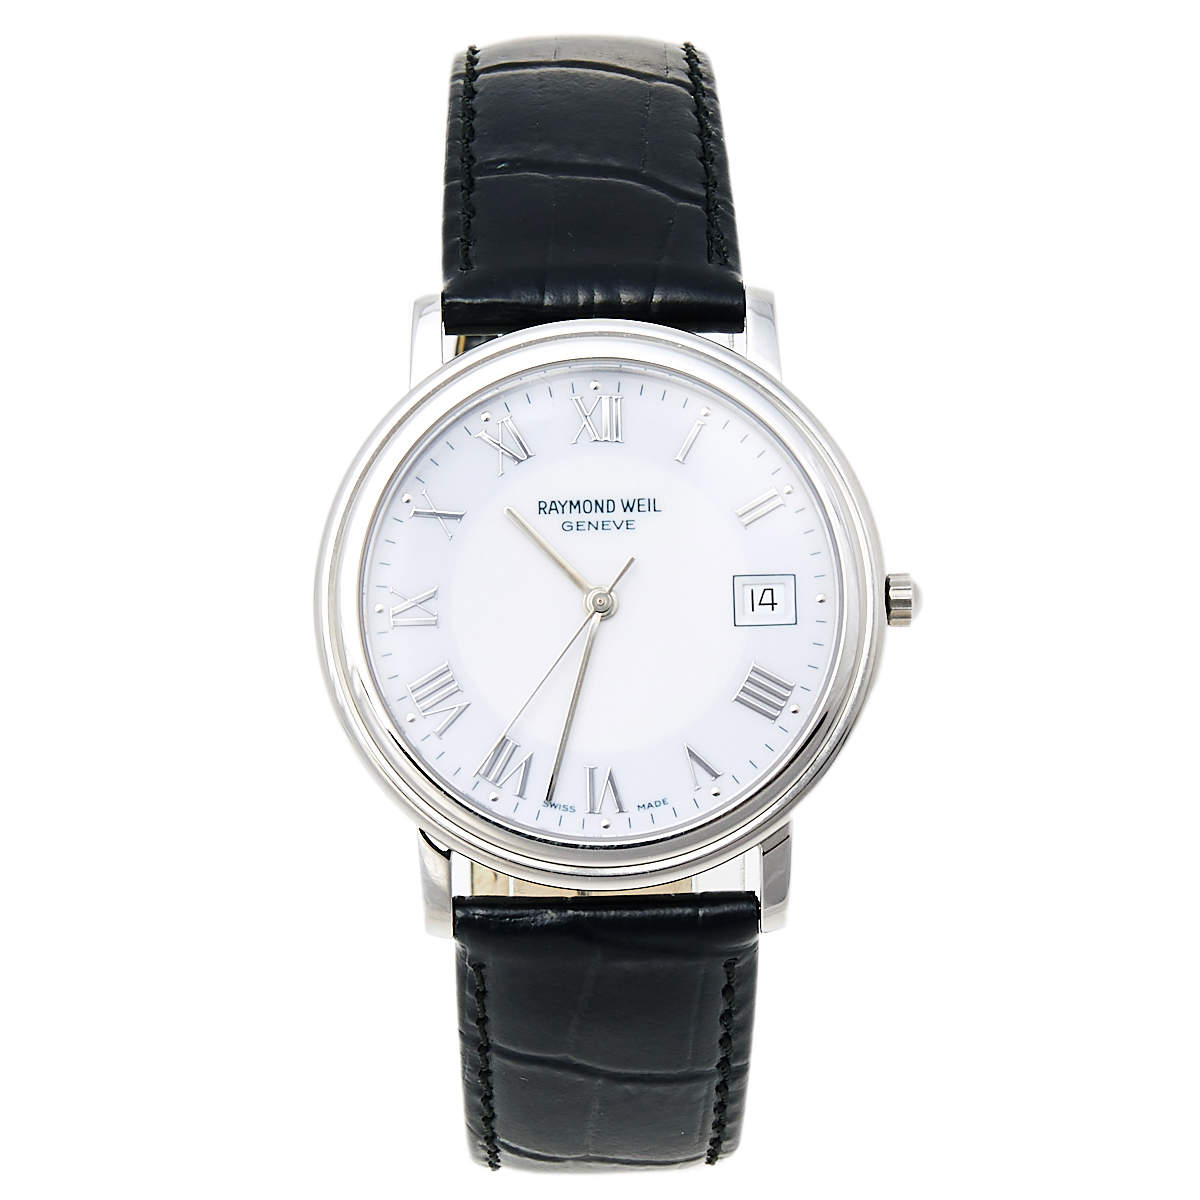 Raymond Weil White Stainless Steel Leather Tradition 5575/1 Men's Wristwatch 35 mm